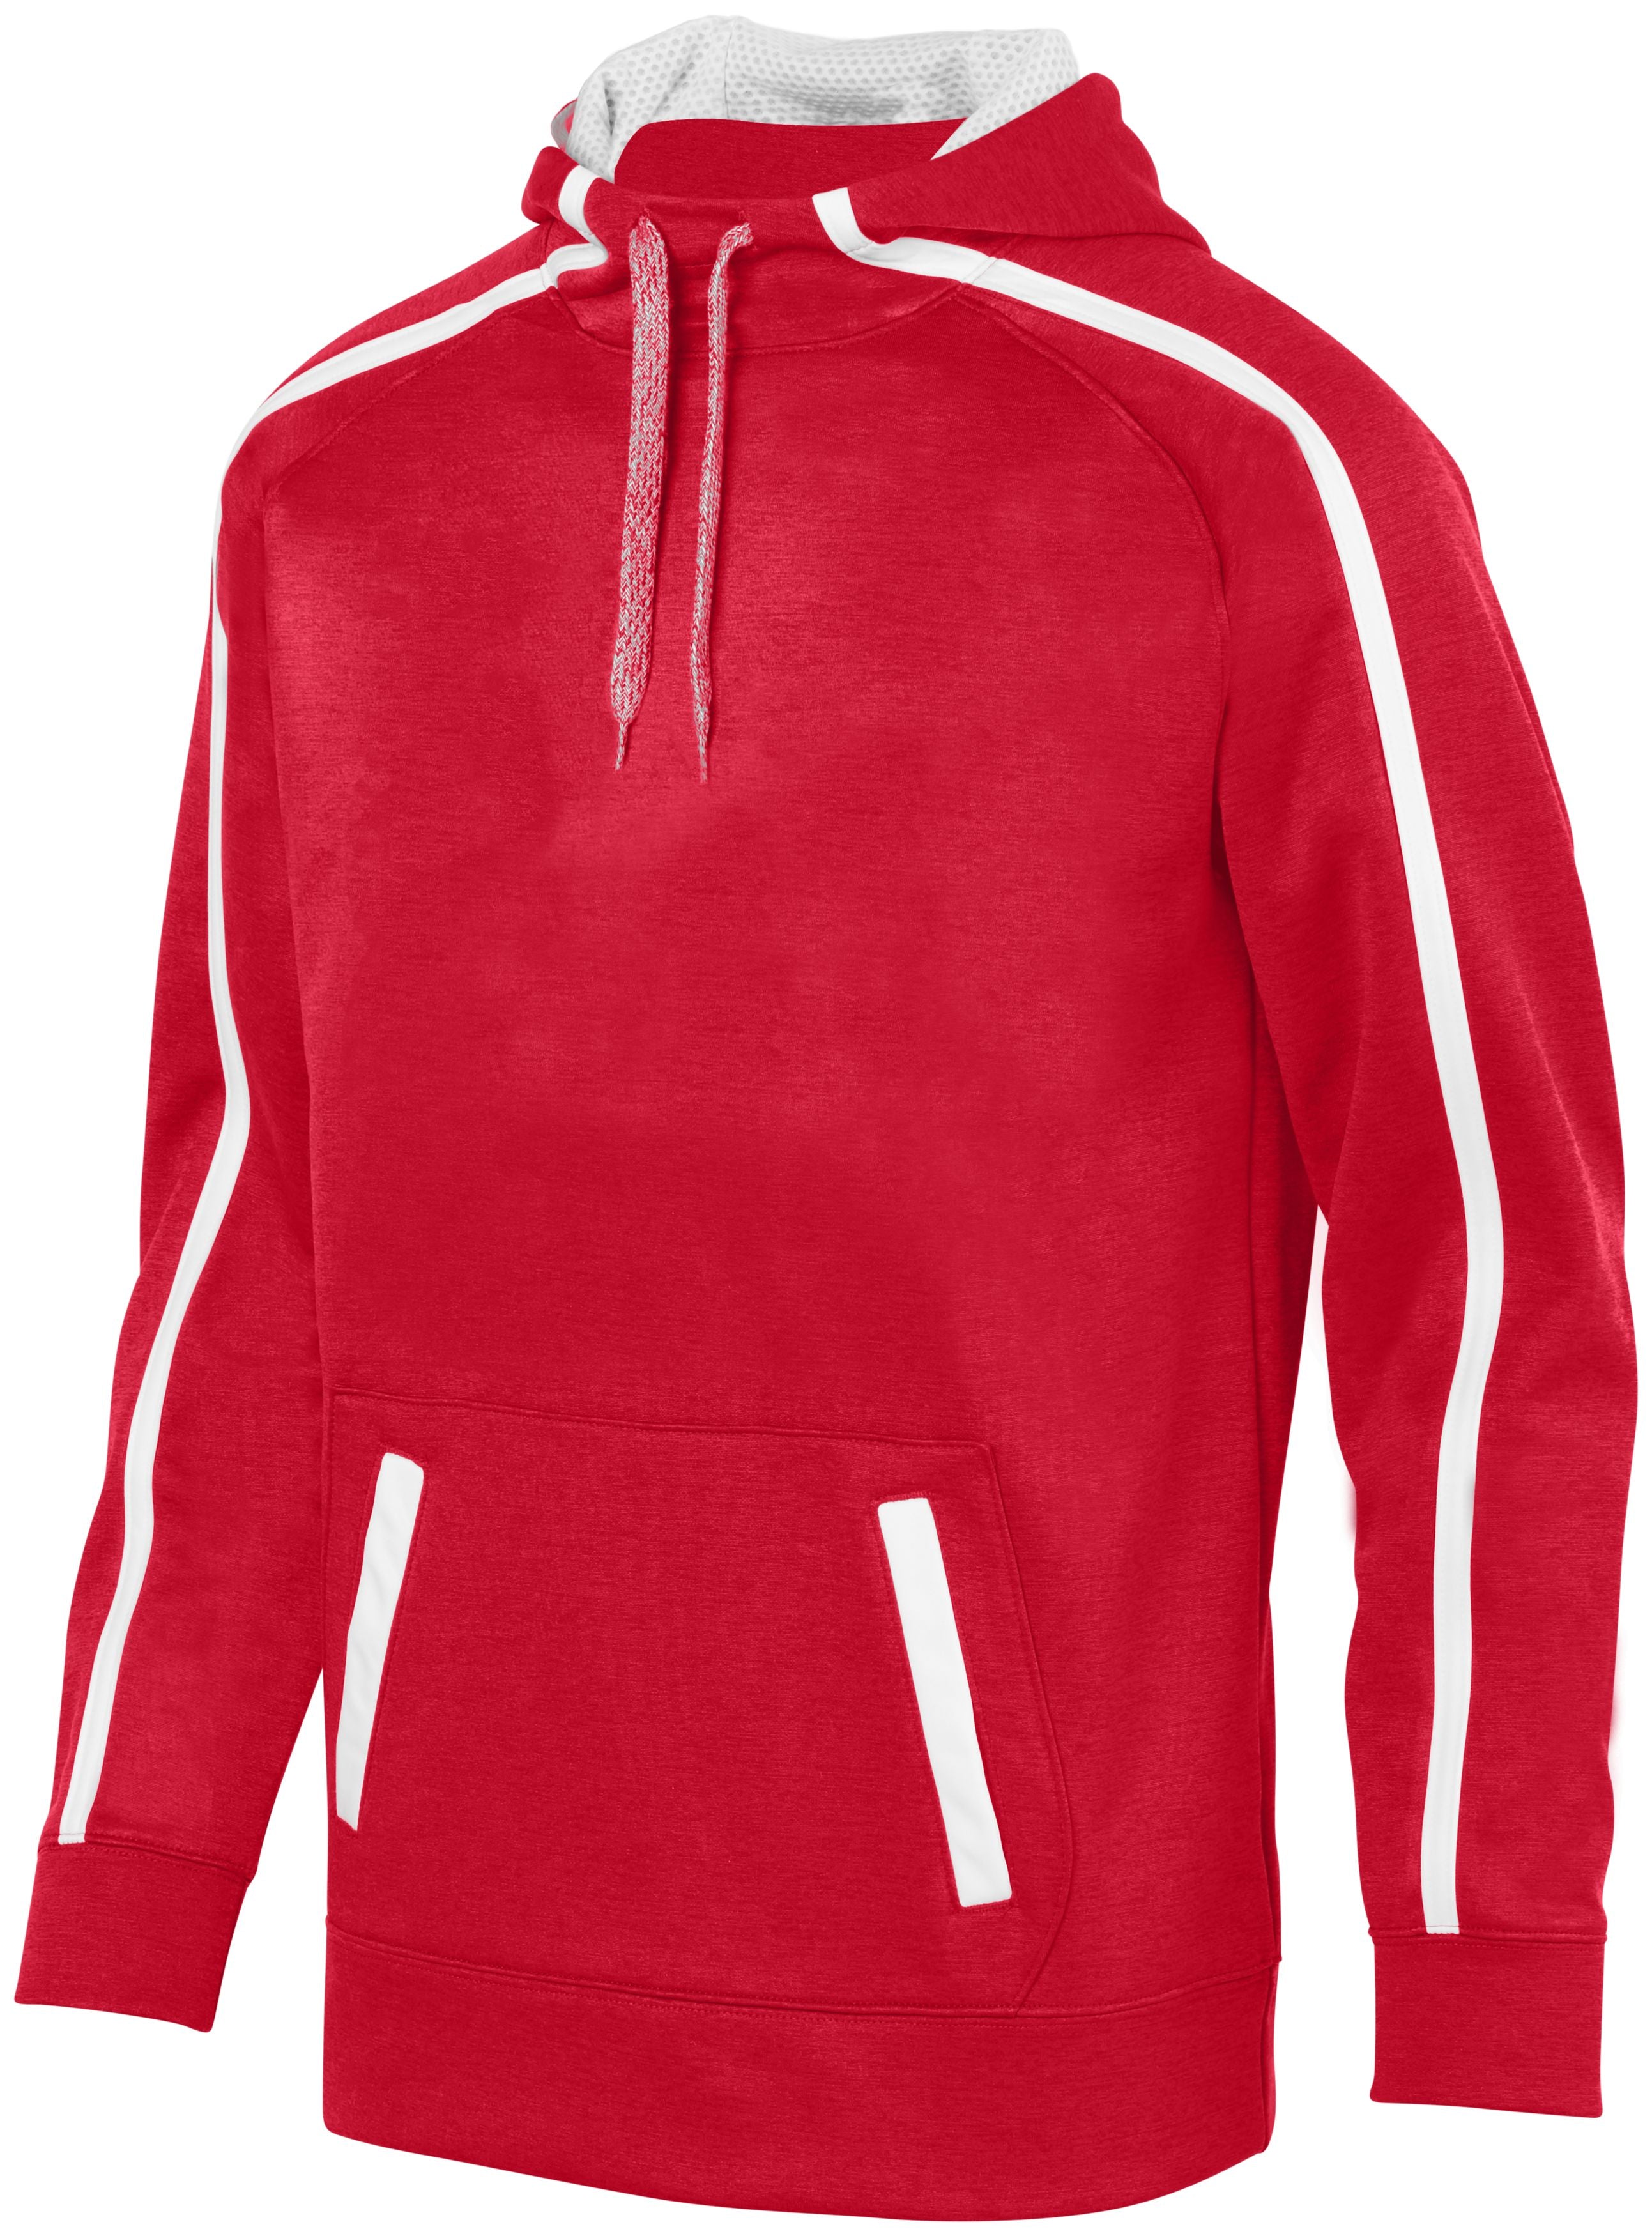 Augusta Sportswear Youth Stoked Tonal Heather Hoodie in Red/White  -Part of the Youth, Augusta-Products, Shirts, Tonal-Fleece-Collection product lines at KanaleyCreations.com